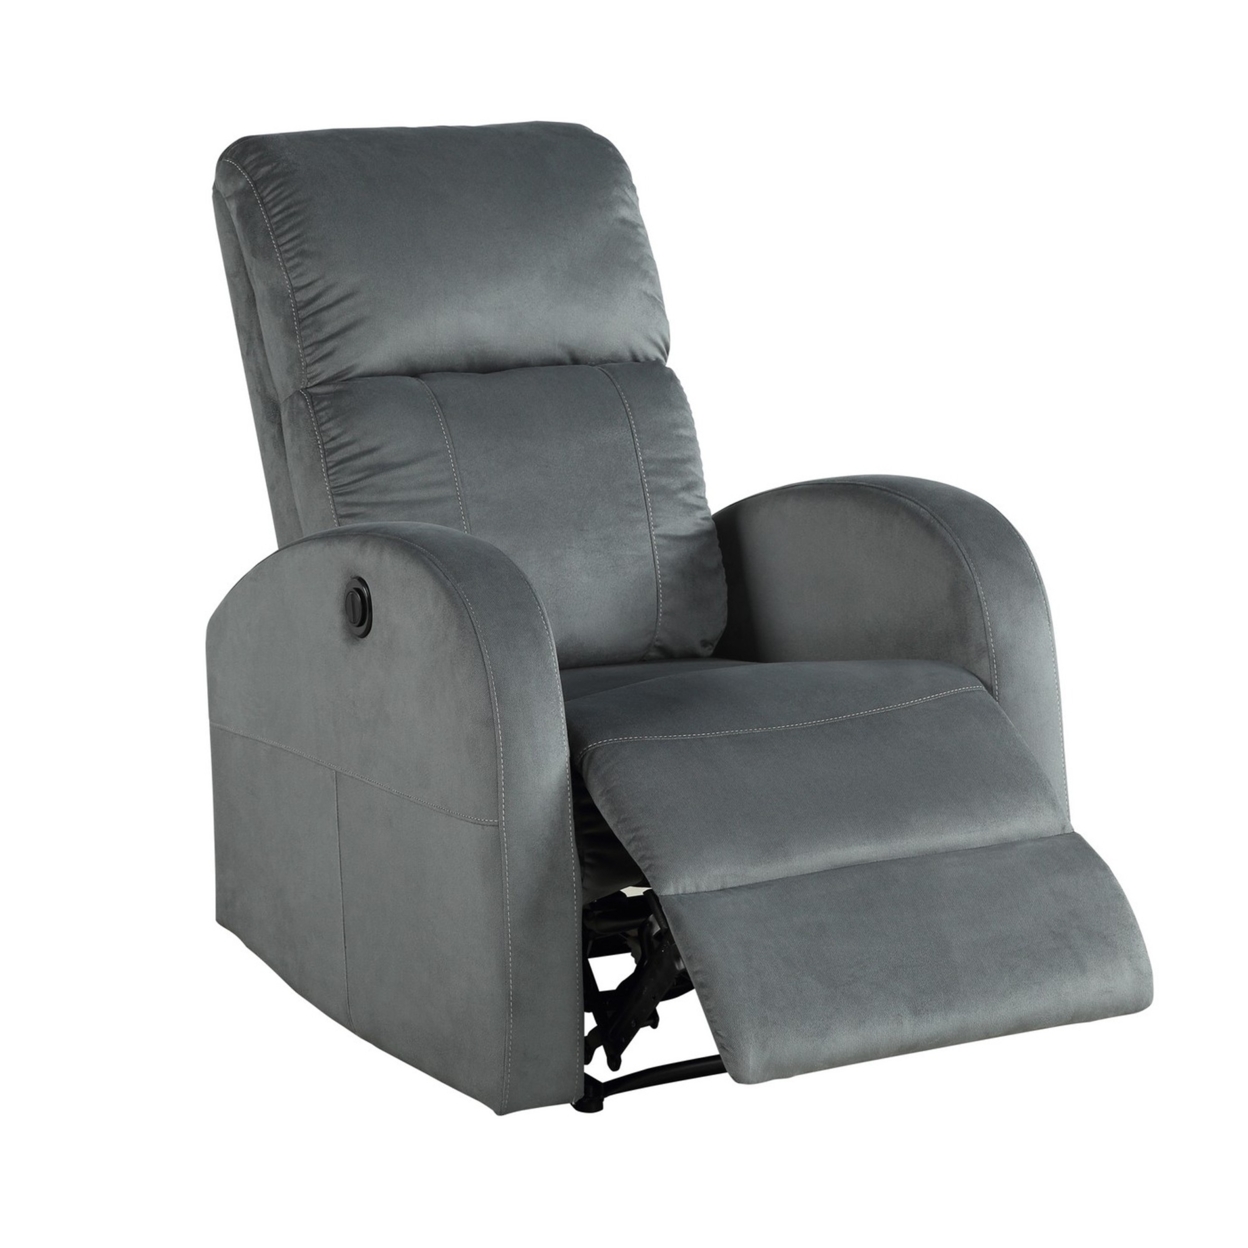 Power Motion Recliner With Fabric Wrapping And Curved Arms, Gray - Saltoro Sherpi